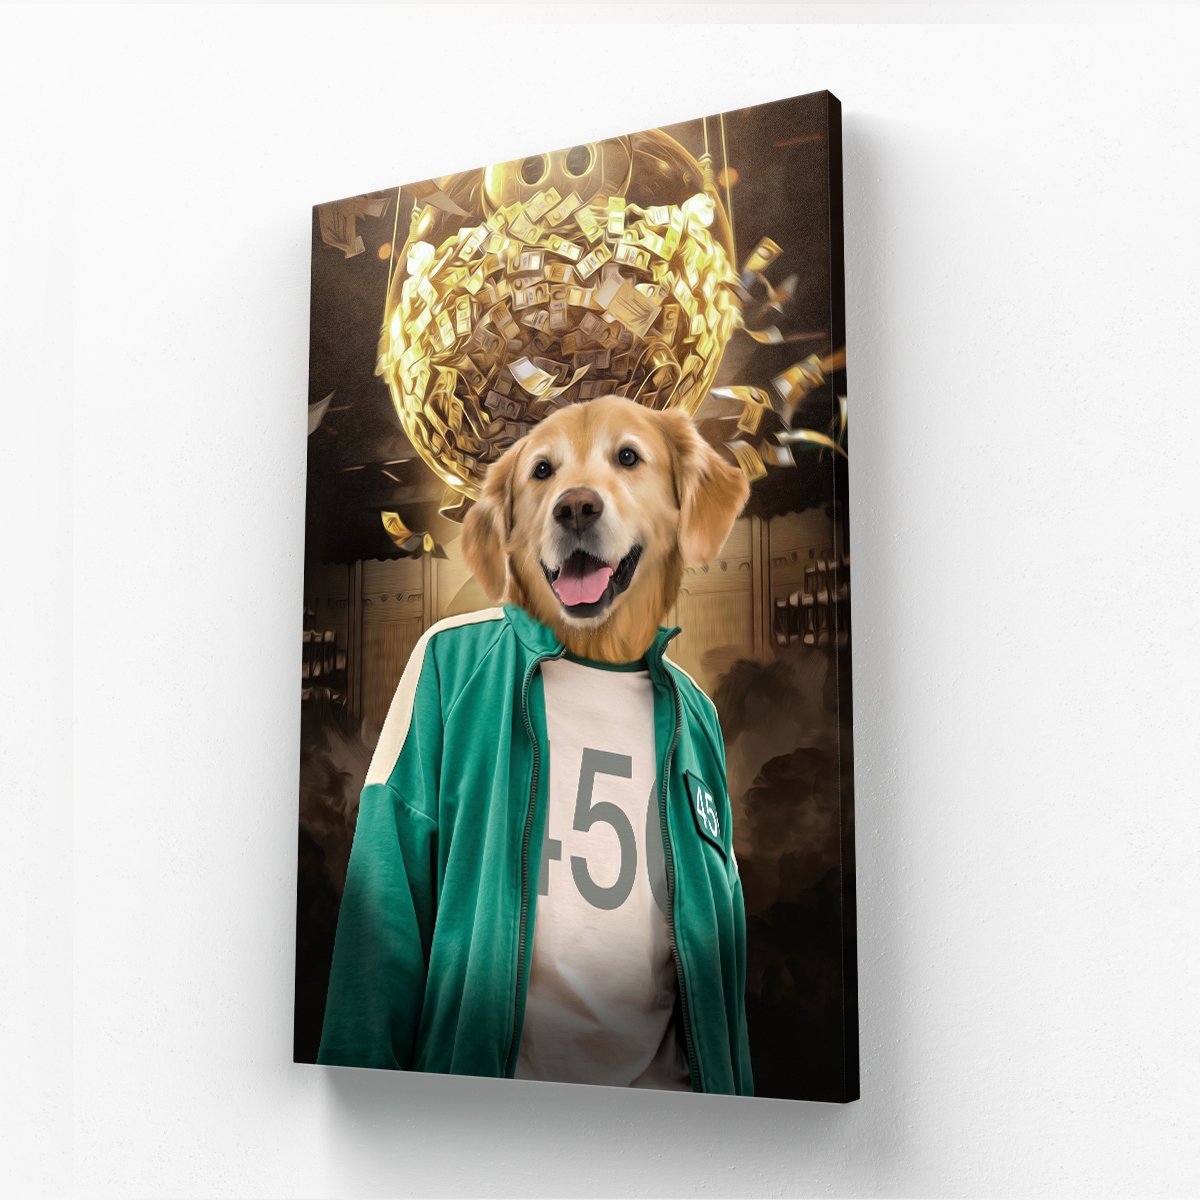 Player 456 (Squid Games Inspired): Custom Pet Canvas - Paw & Glory - #pet portraits# - #dog portraits# - #pet portraits uk#paw & glory, pet portraits canvas,pet in costume canvas, pet on a canvas, pets painted on canvas, personalised pet canvas, custom dog art canvas